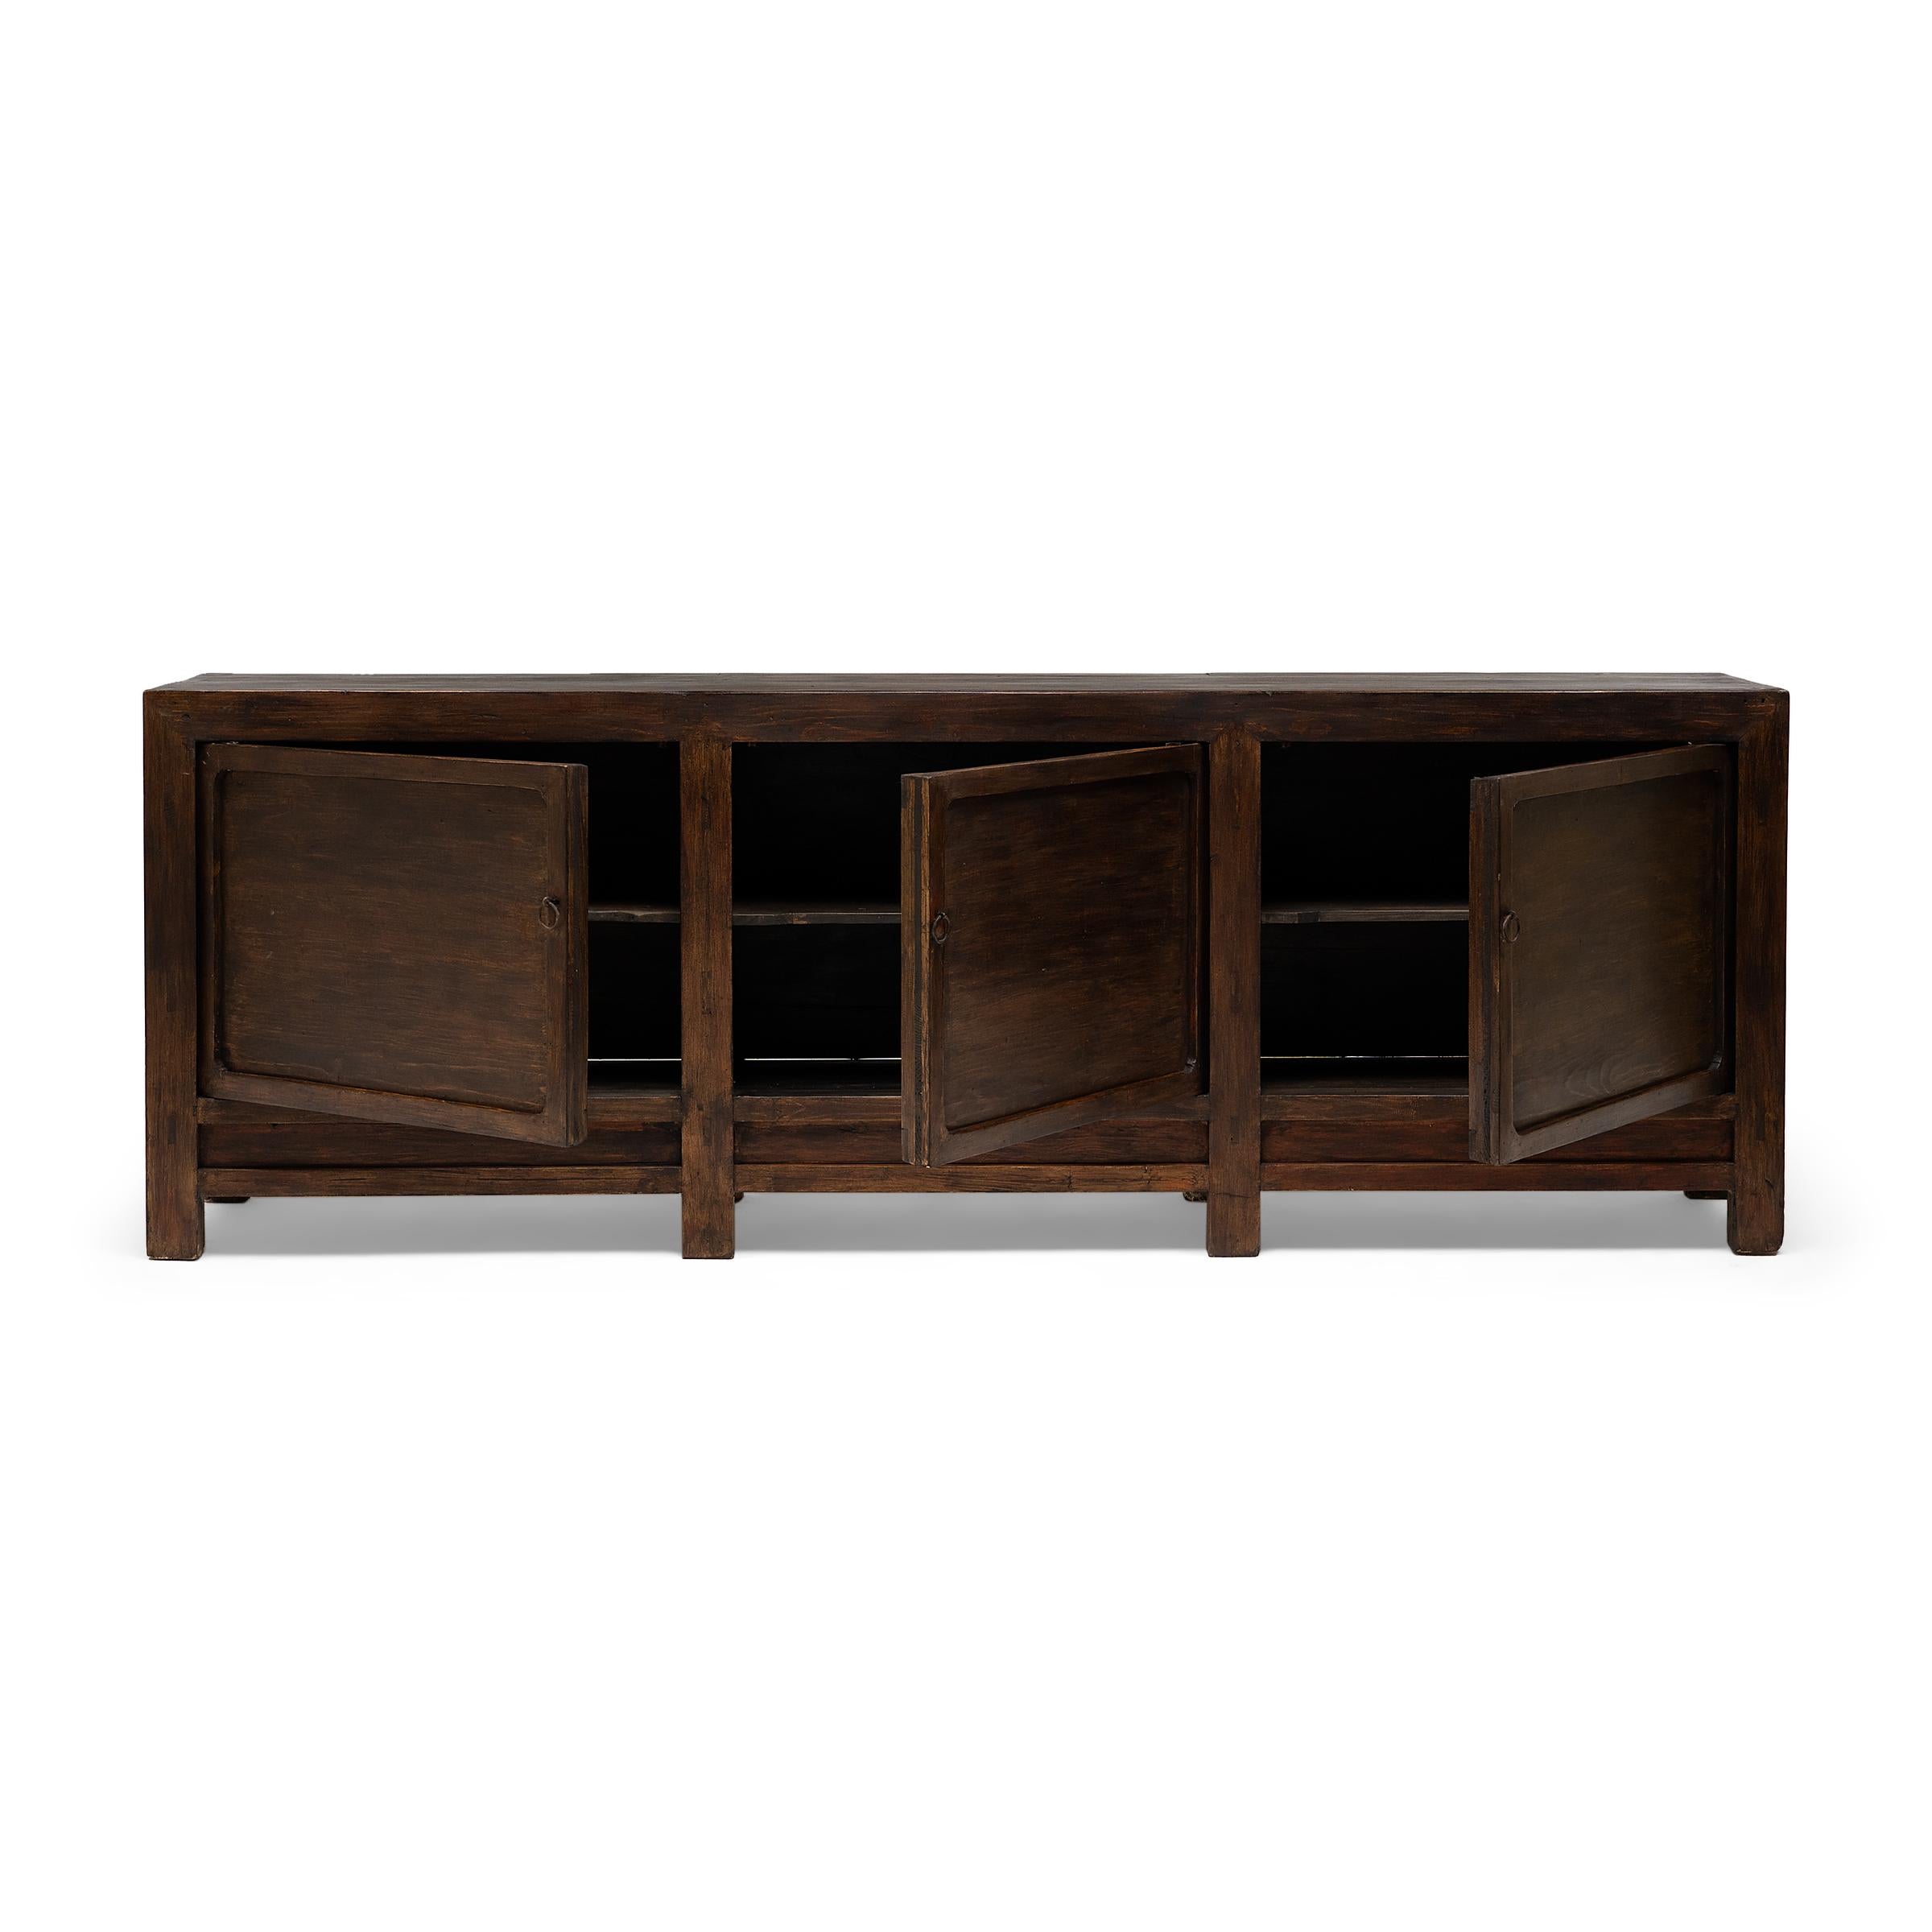 Created in the style of Mongolian storage coffers, this early 20th-century herdsman's chest has a clean lined design with charming rustic appeal. The square corner cabinet features three doors with metal loop handles that open to a large interior